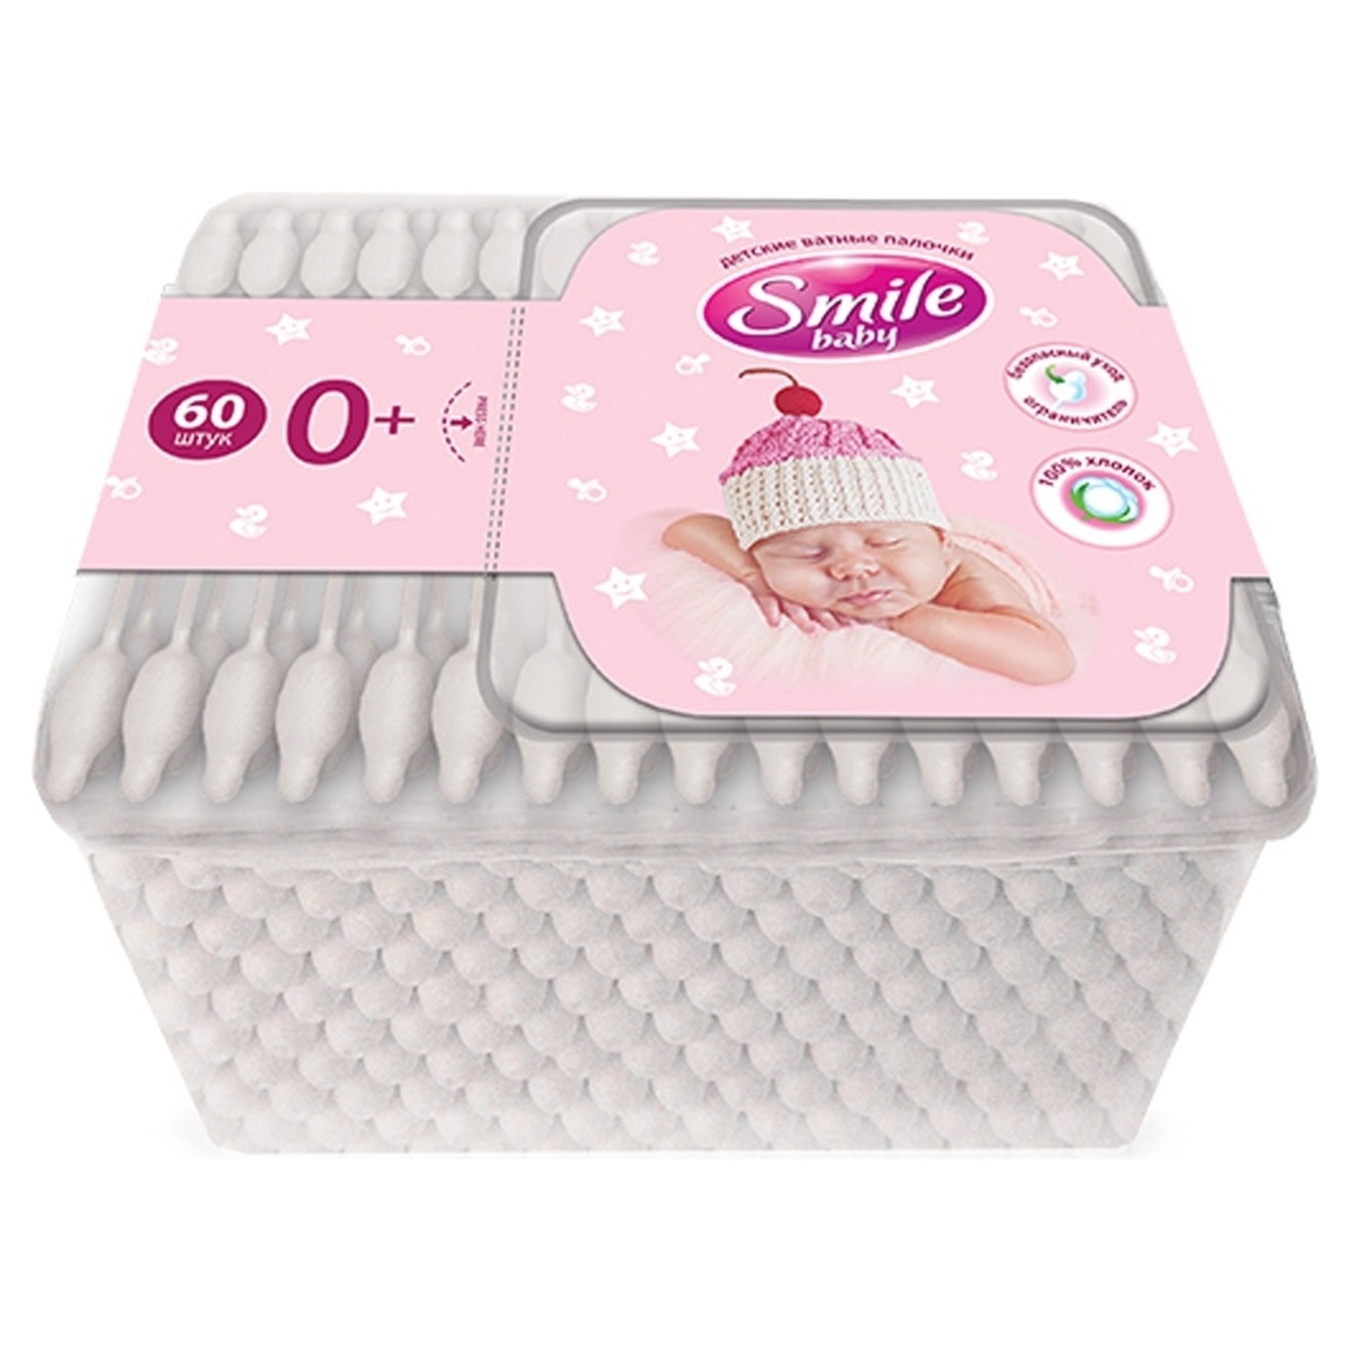 Smile cotton swabs for children in a square box with a limiter of 60 pcs